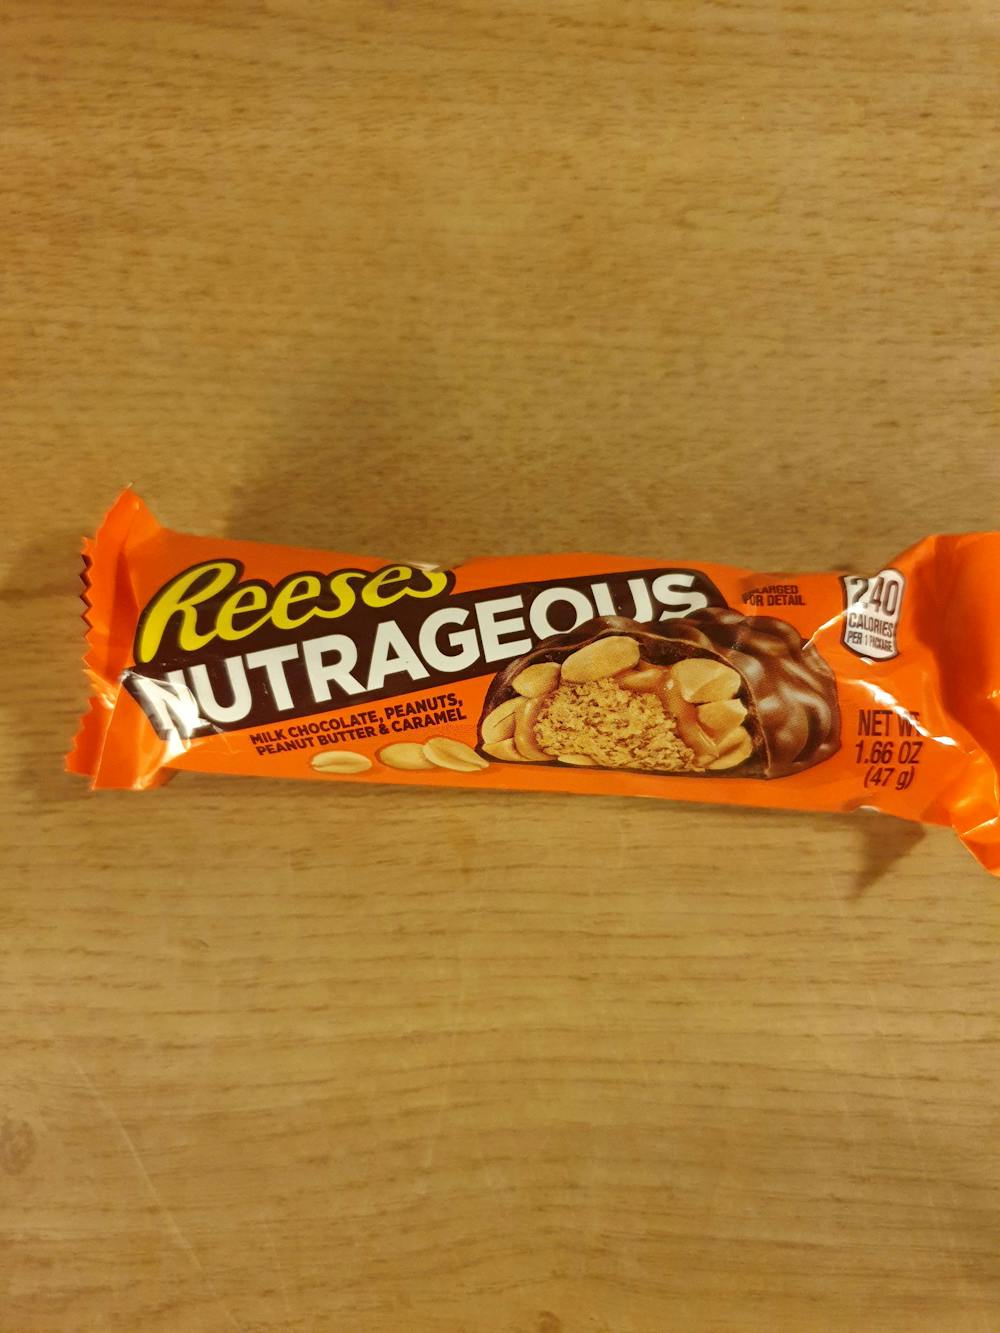 Nutragenous, Reeses